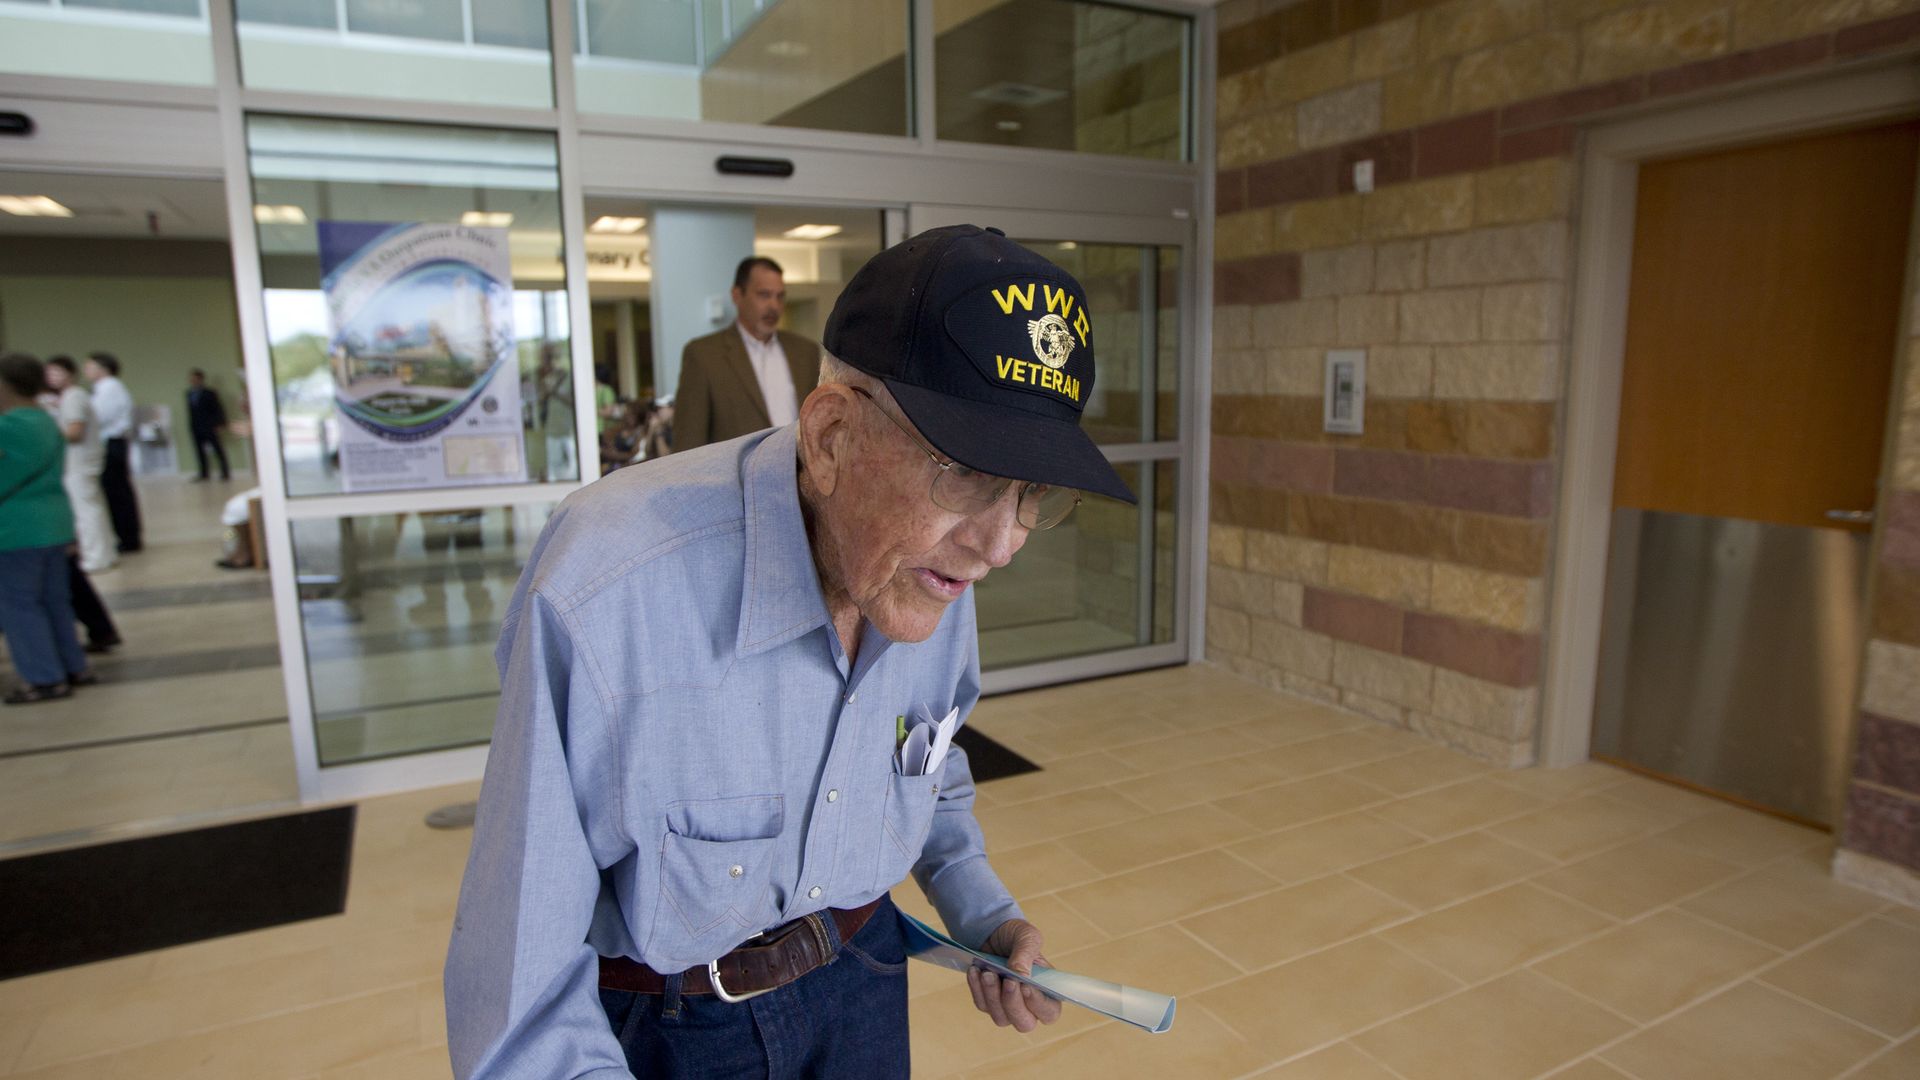 A veteran walks out of an outpatient clinic in Texas.